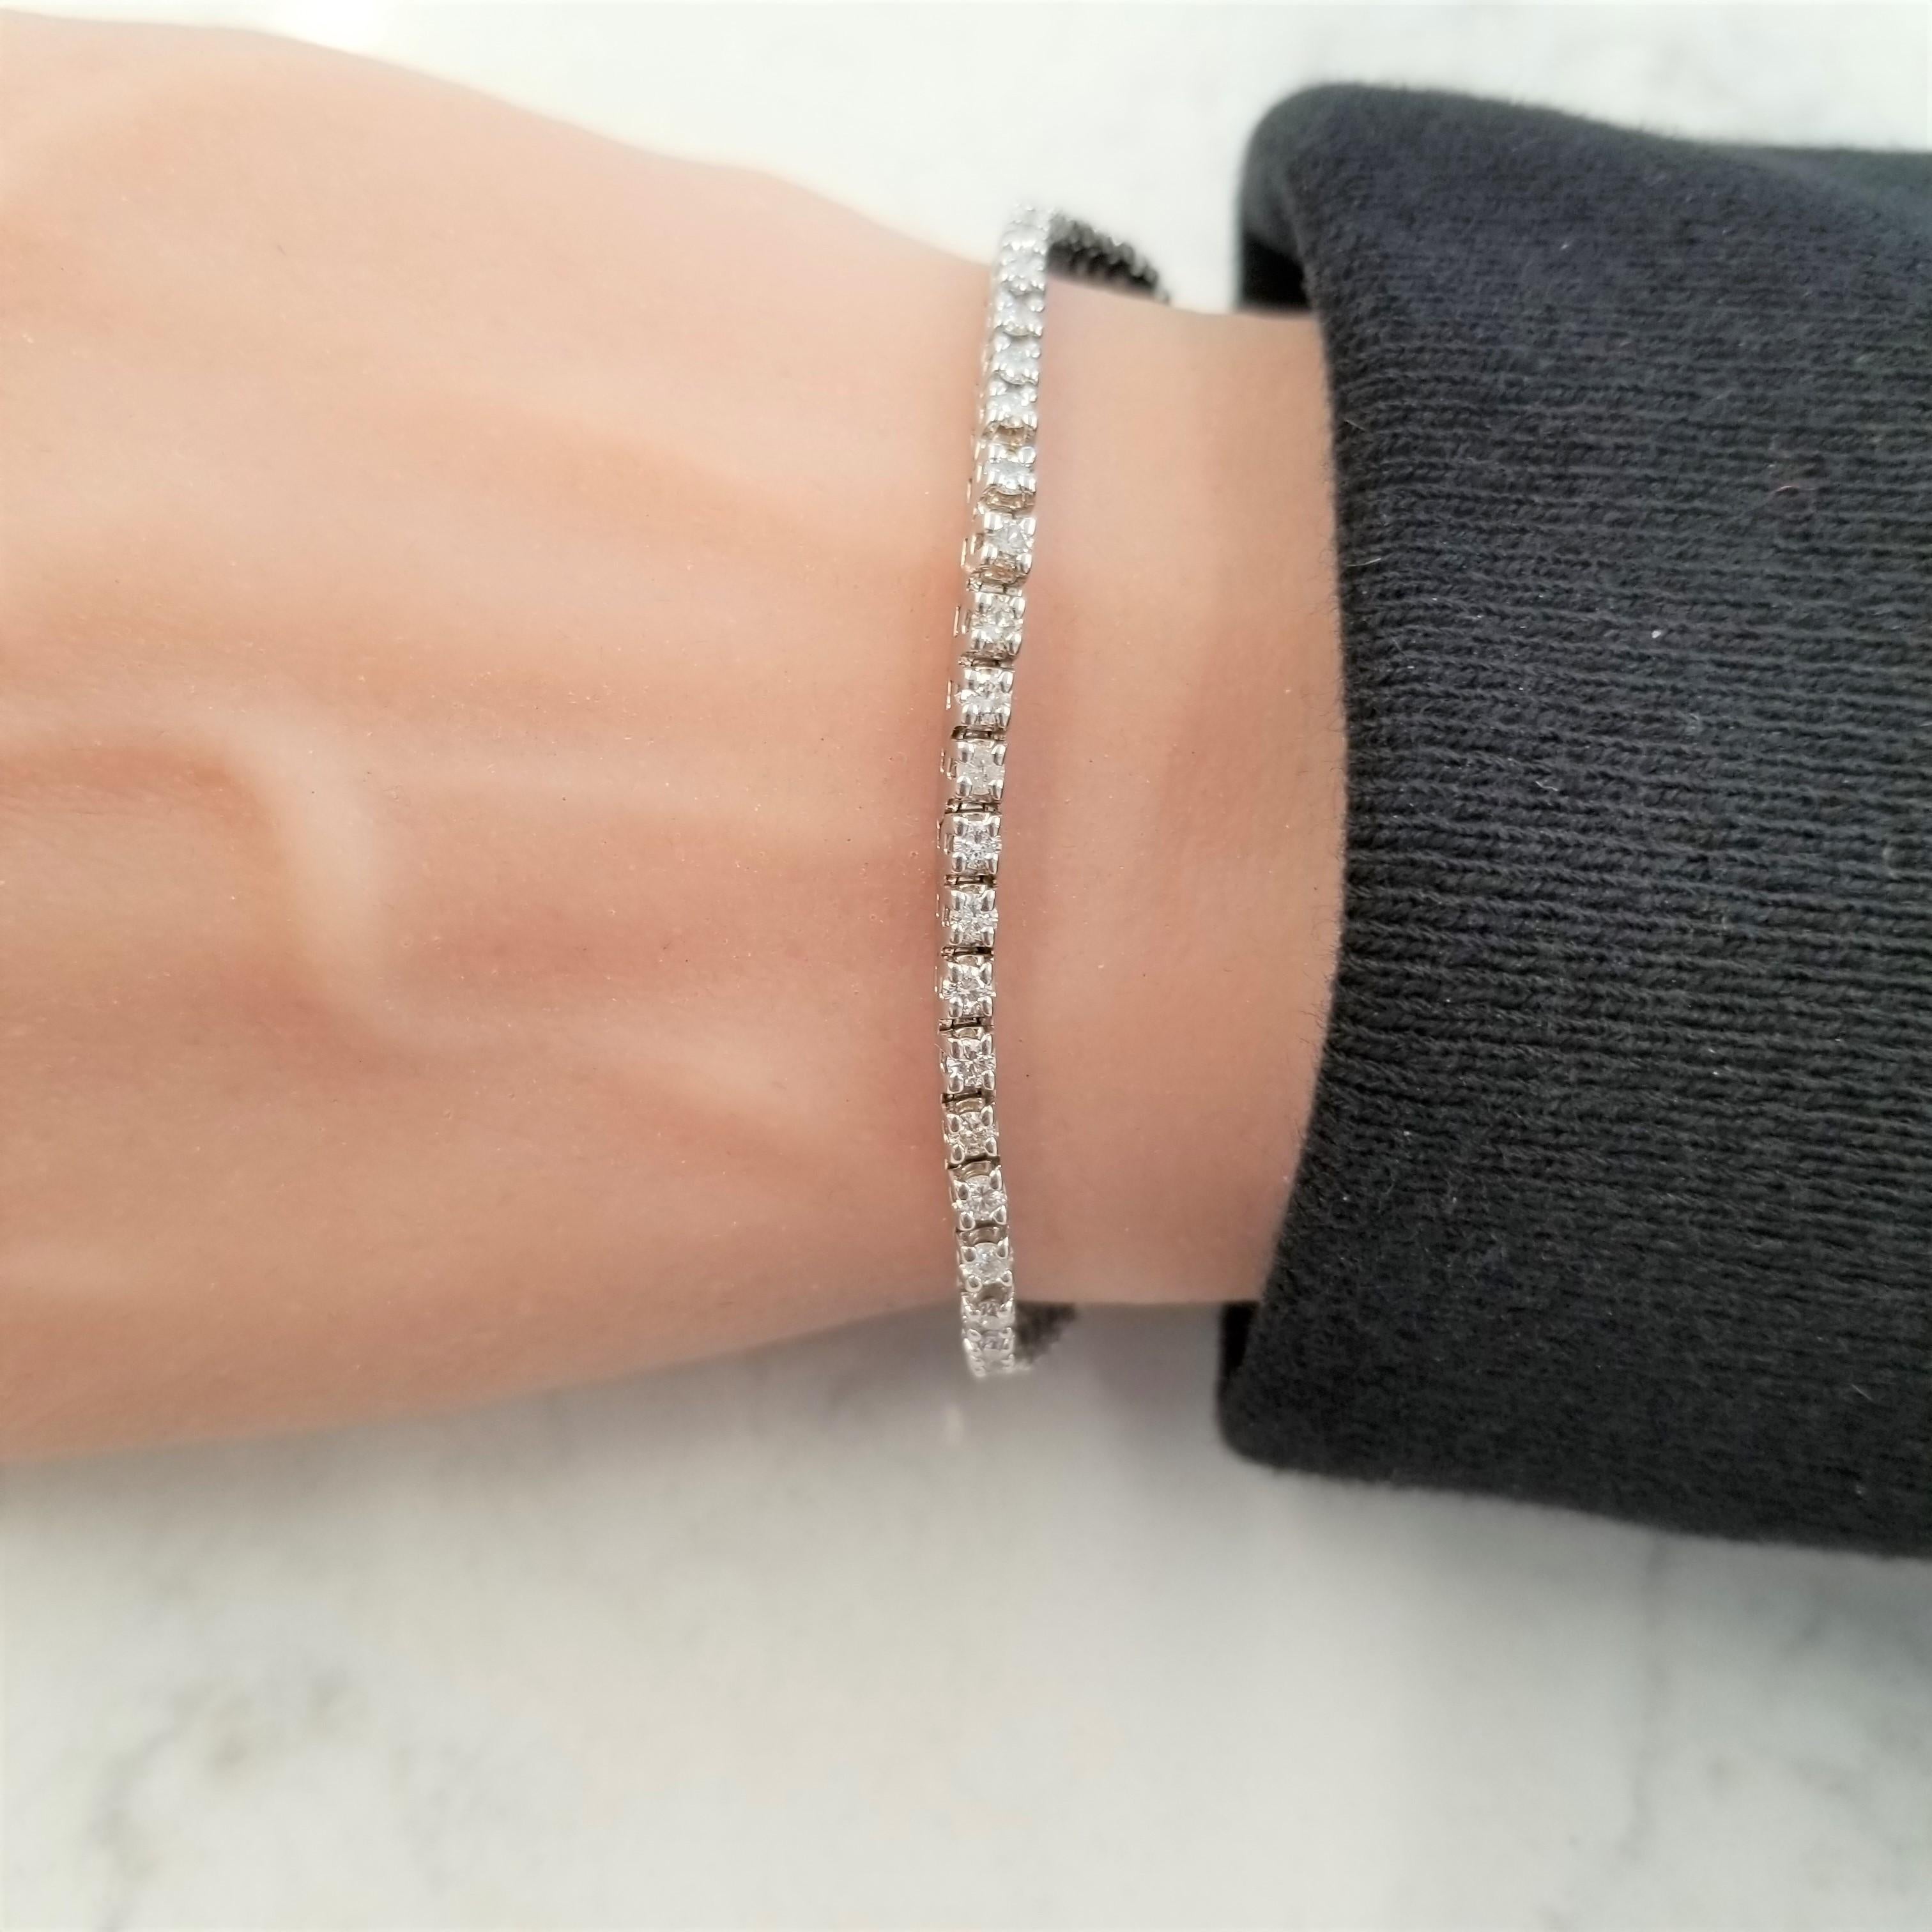 Impress your fans (or nearest acquaintances) with this versatile 2.75 carat, prong set diamond tennis bracelet. The round brilliants are Near Colorless and SI in purity. You don’t have to be a tennis champ to enjoy this jewelry staple. They are for